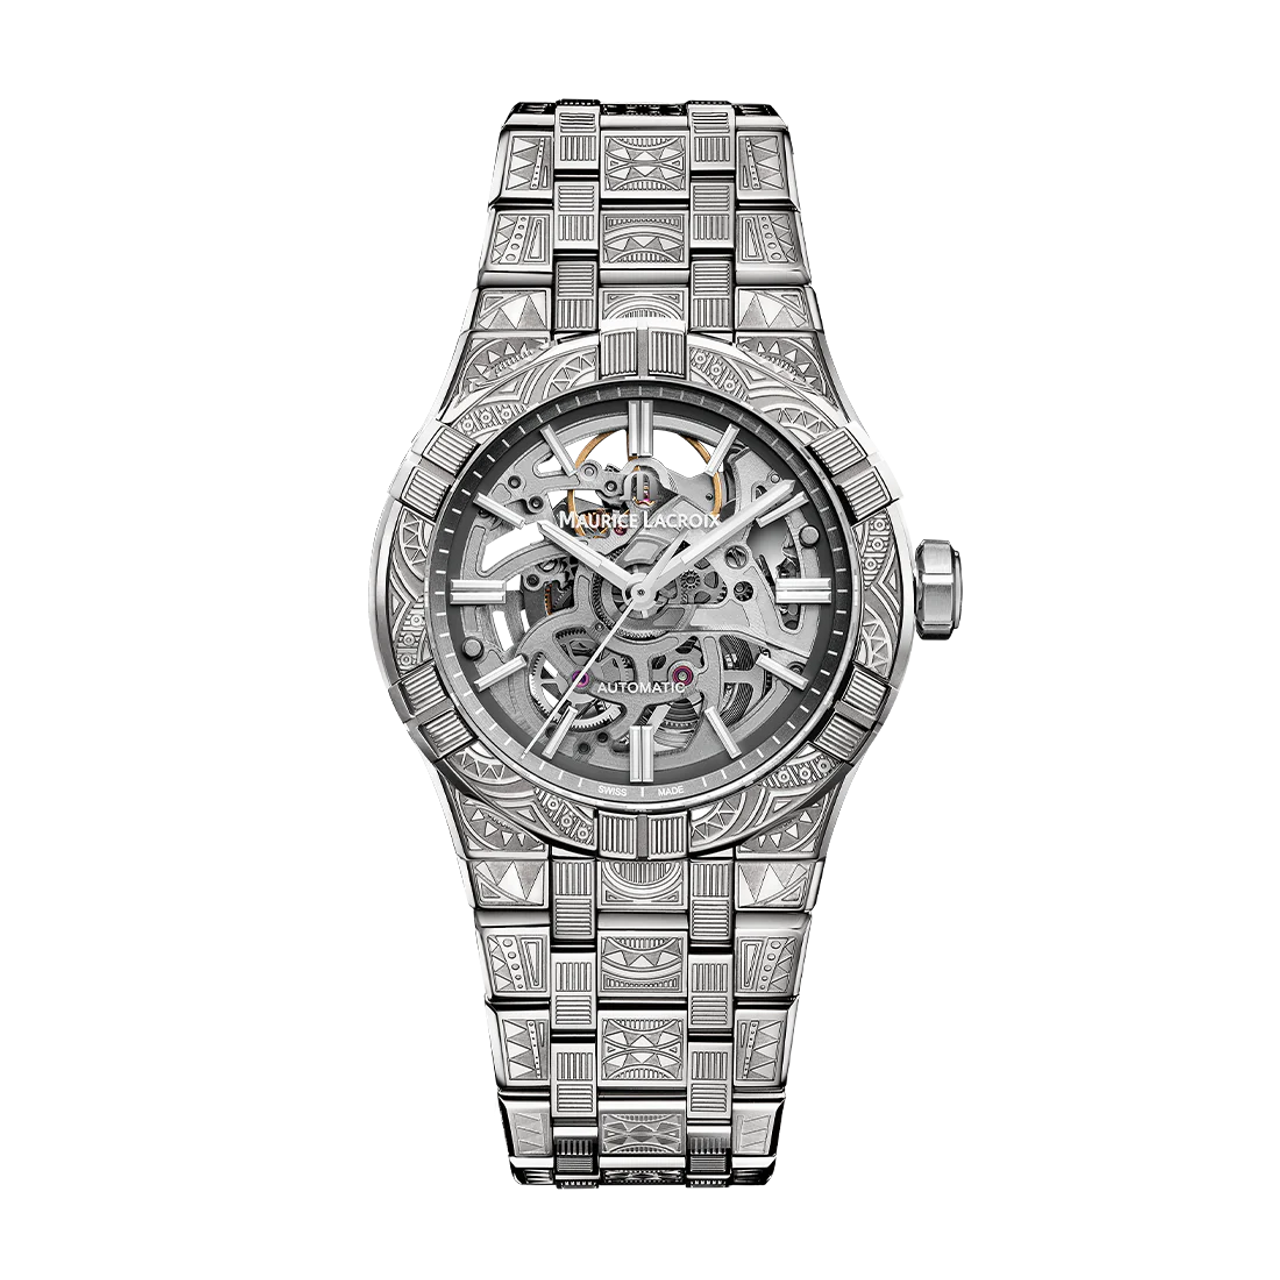 Maurice Lacroix Aikon Urban Tribe Skeleton Limited Edition